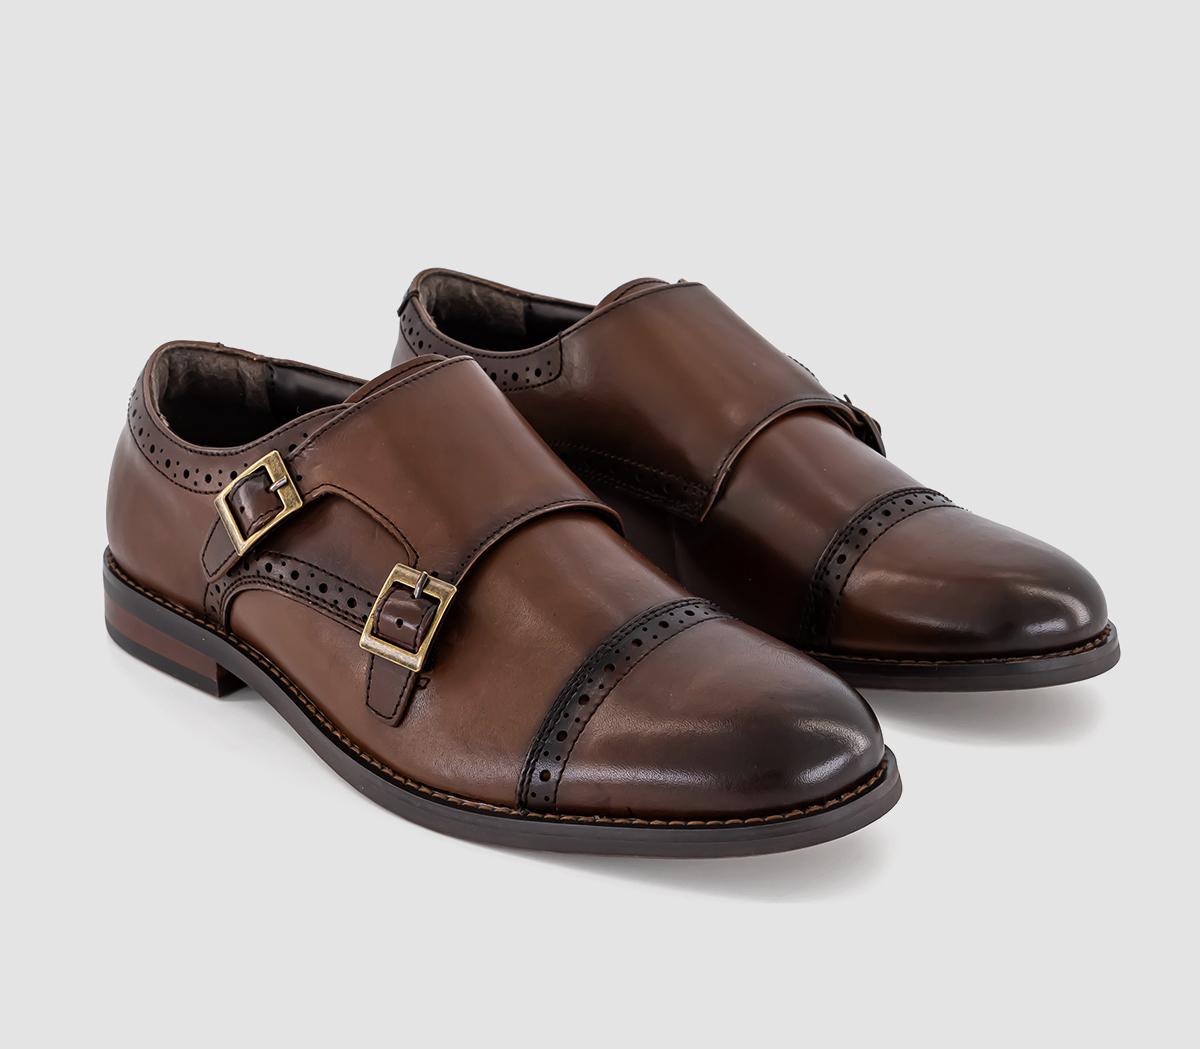 OFFICE Mens Myles Double Strap Monk Shoes Brown Leather, 11